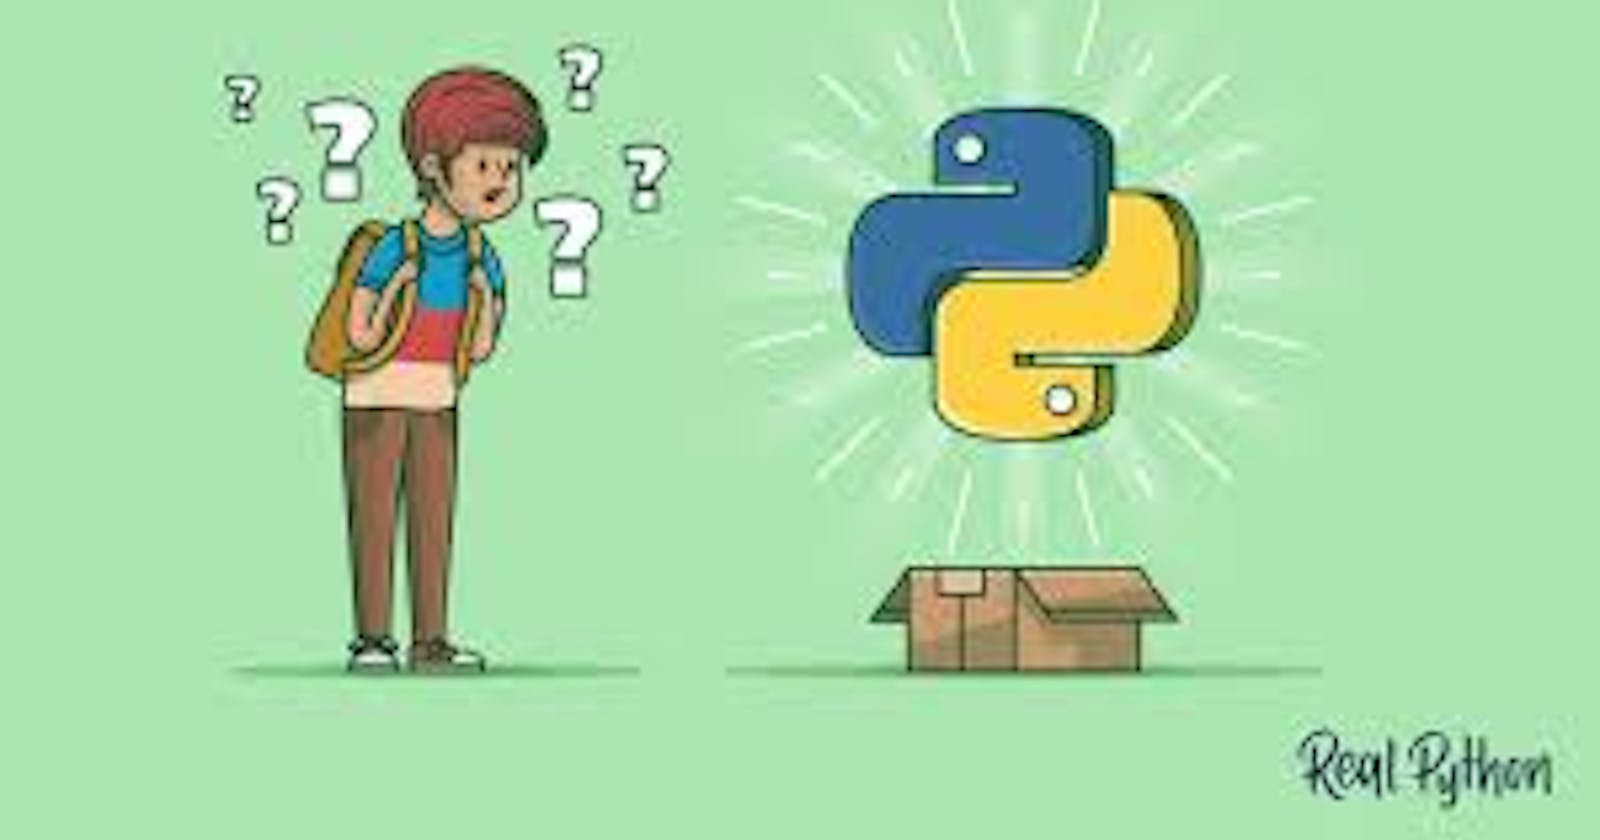 Getting Started With Python: The Simplest Beginners Guide